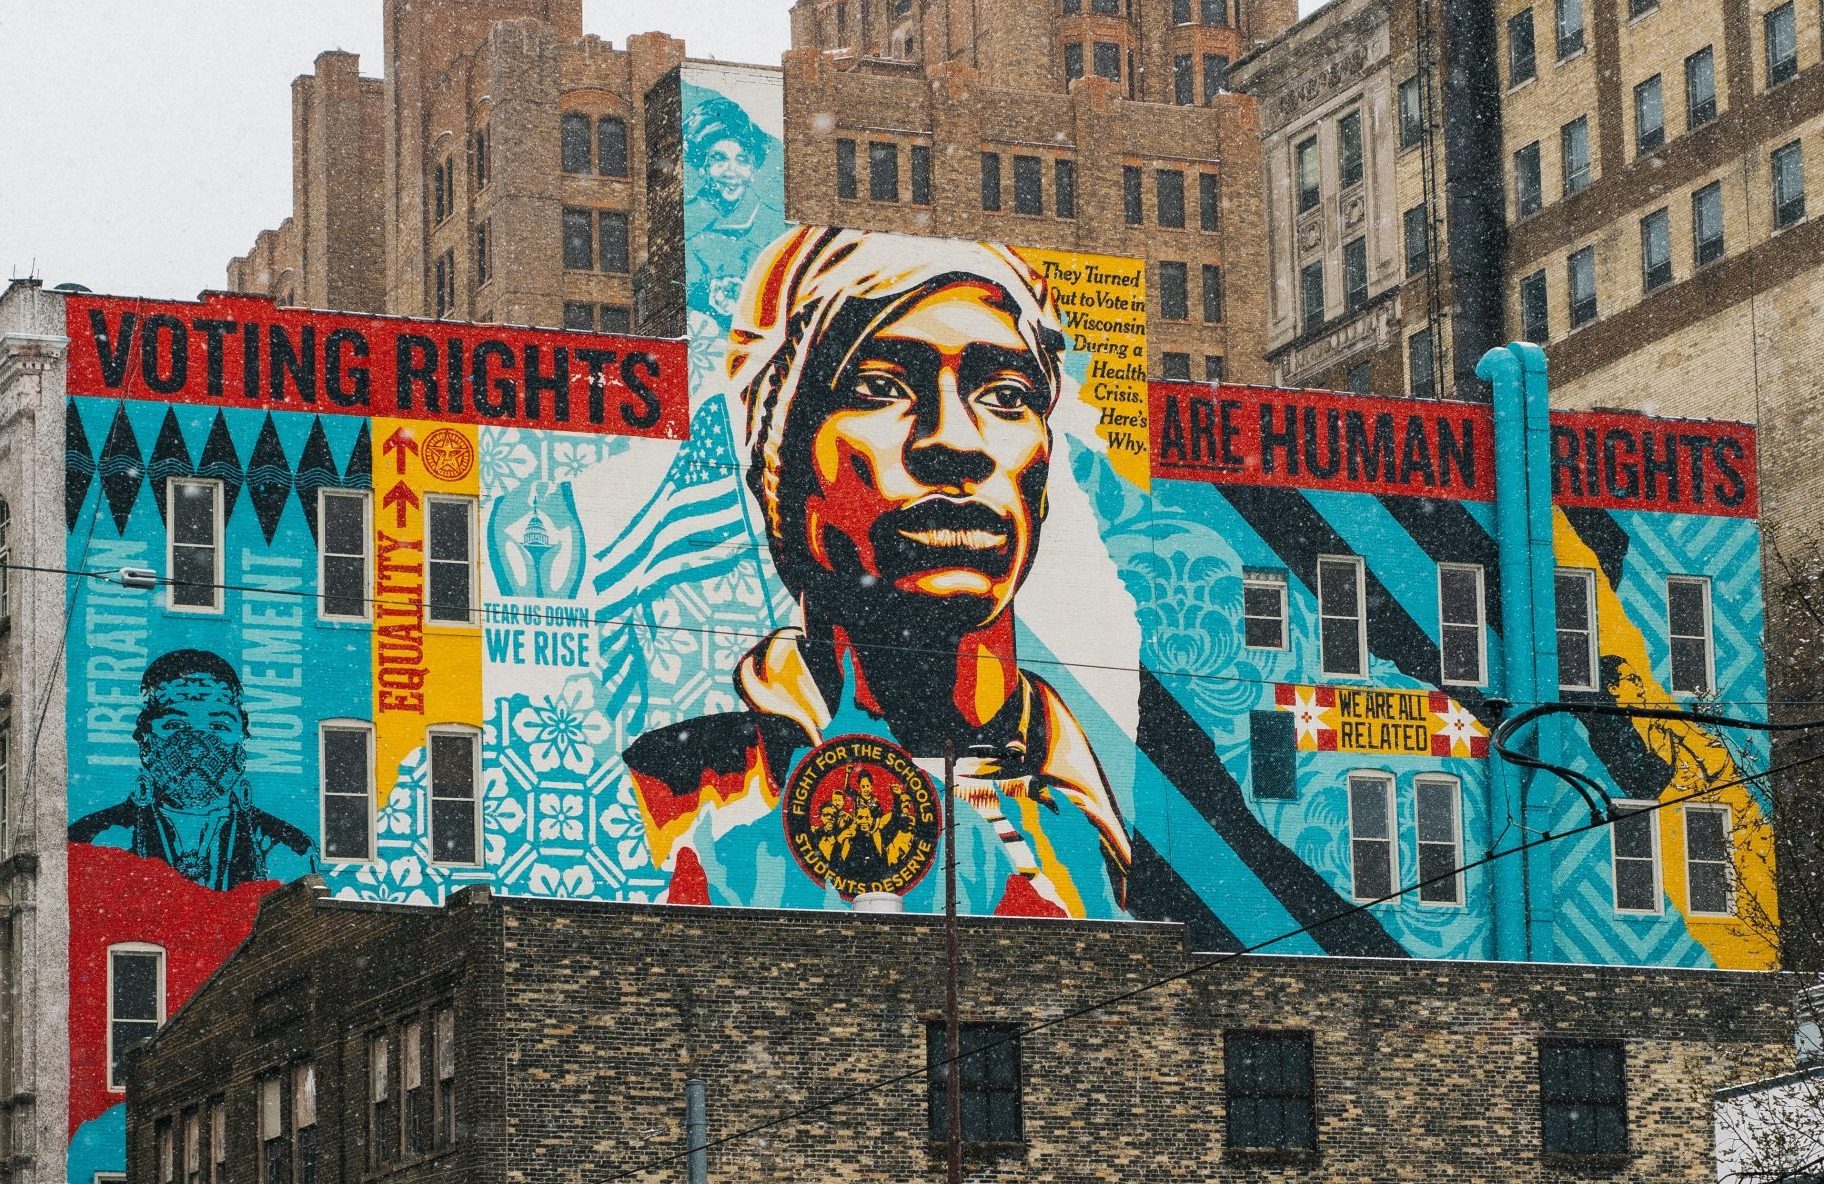 in an article about the importance of voting a voter rights mural ia featured on a city building